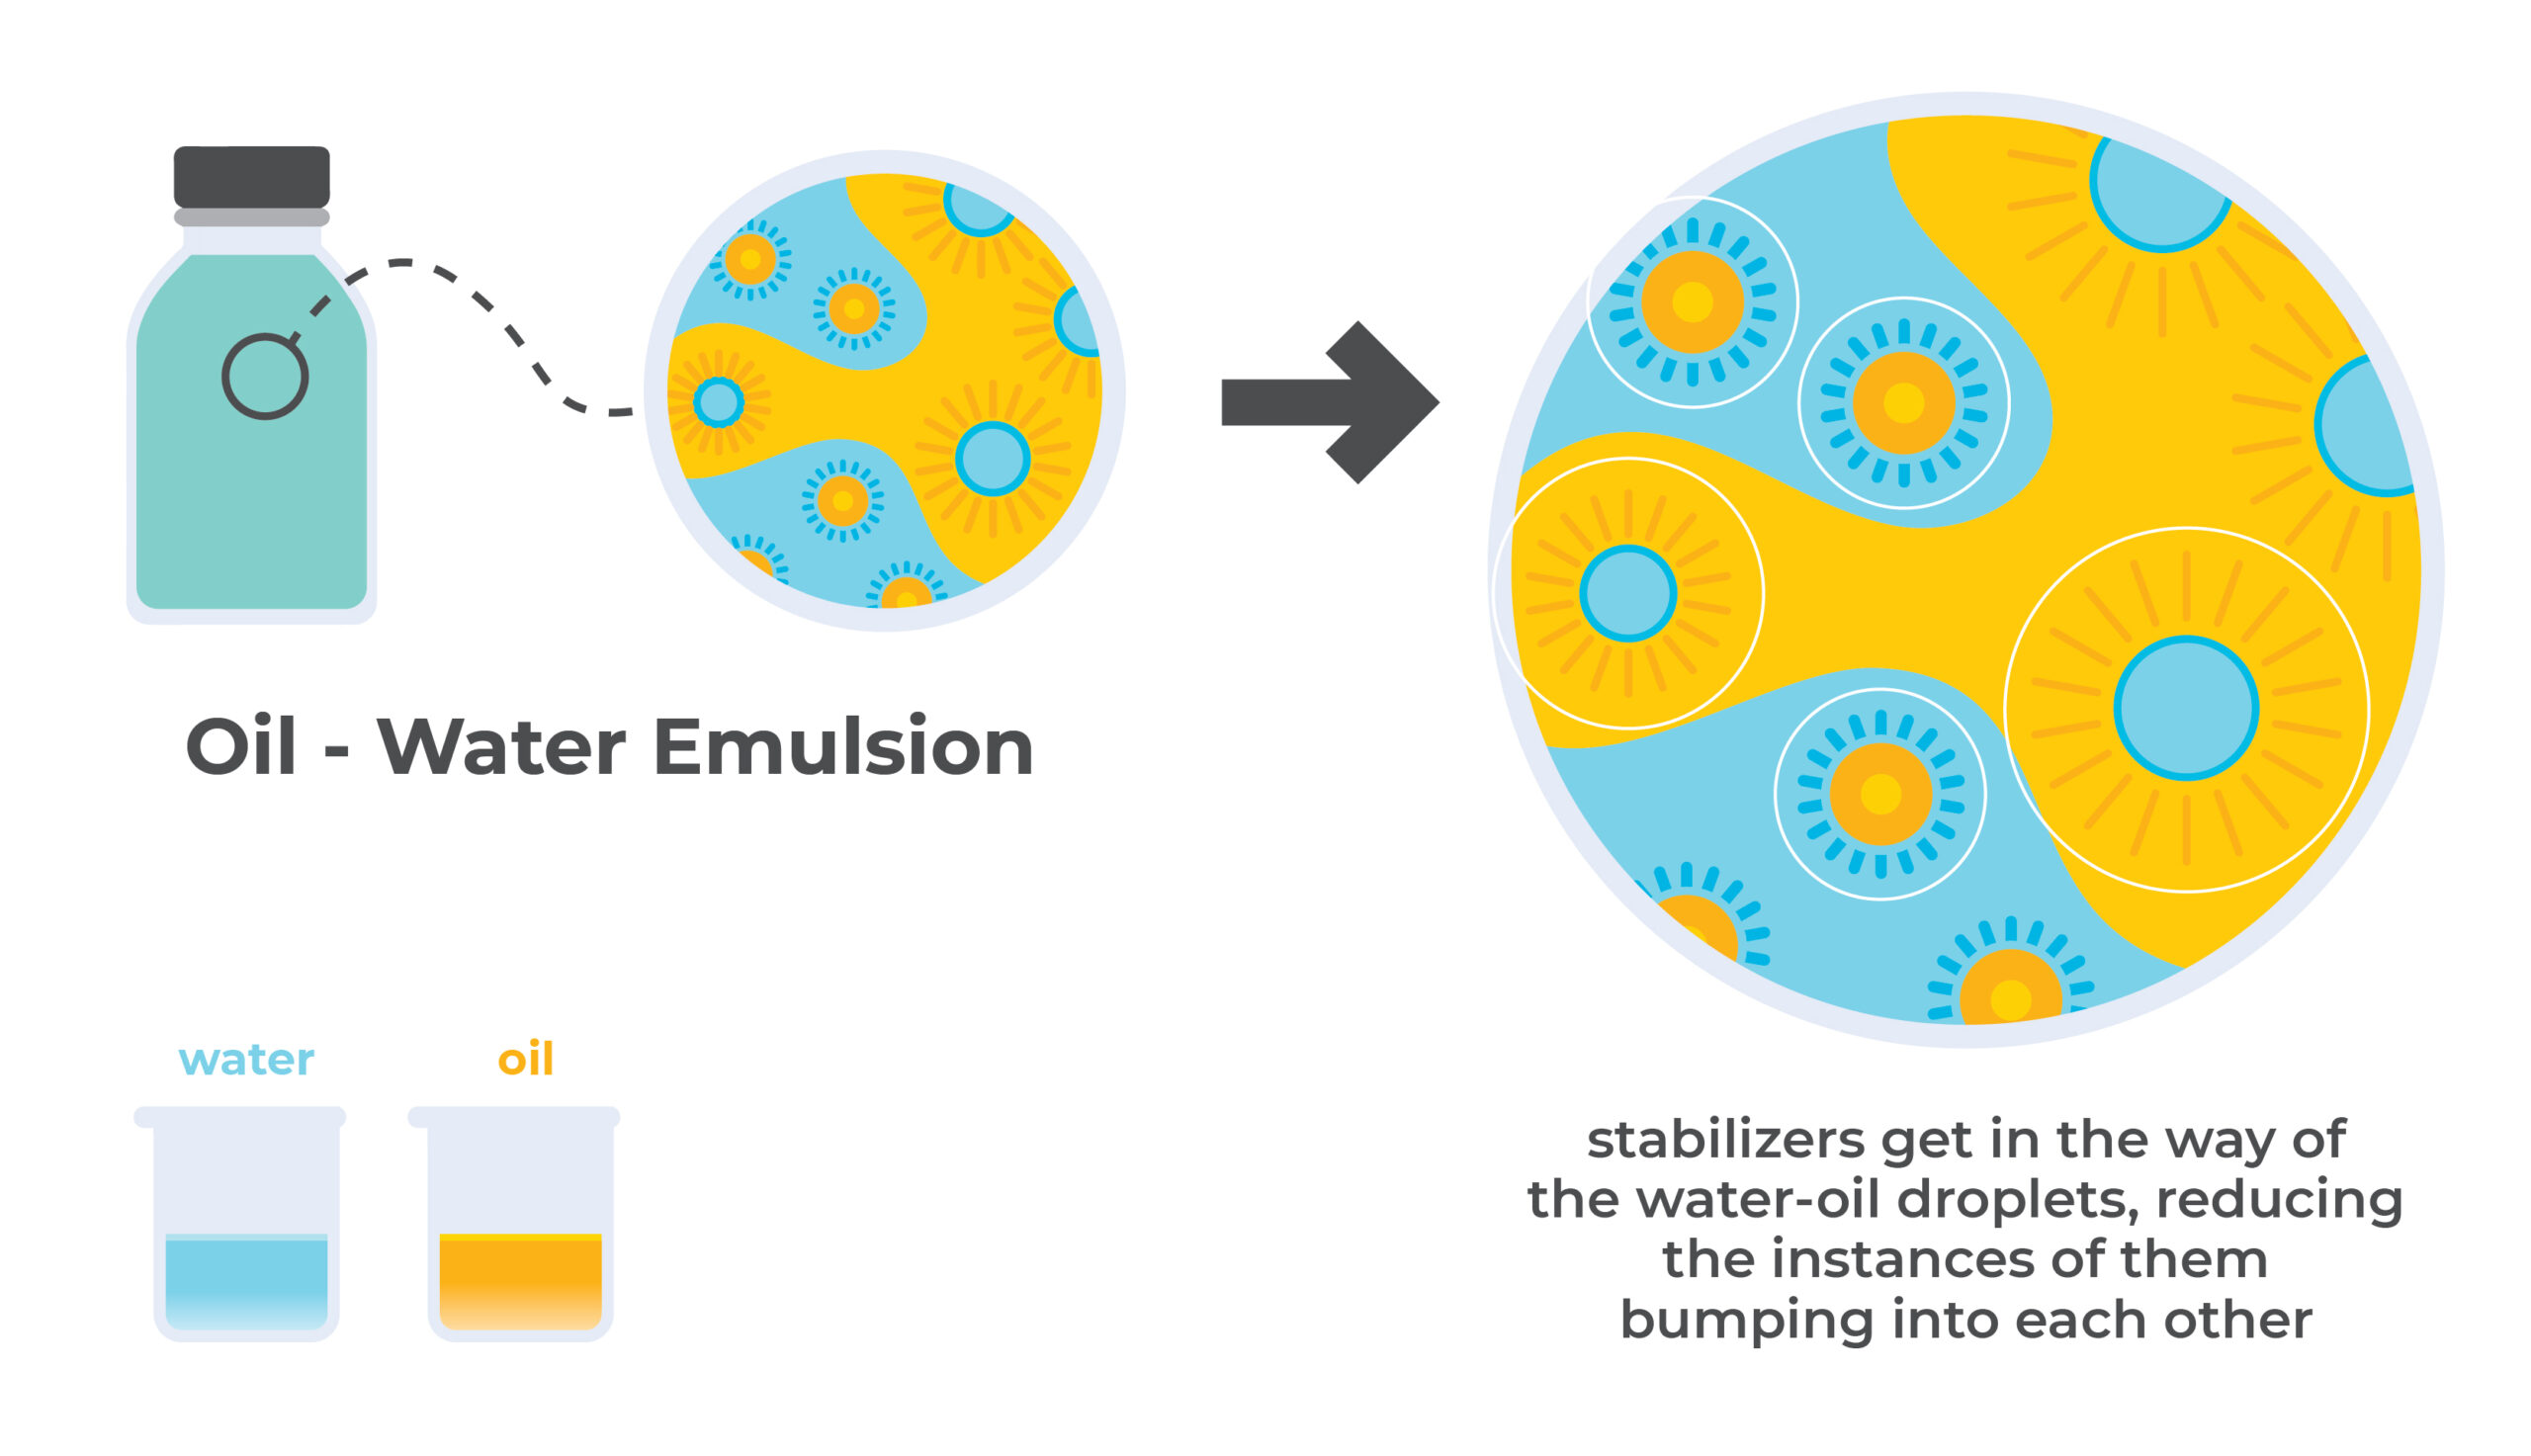 Emulsions: making oil and water mix